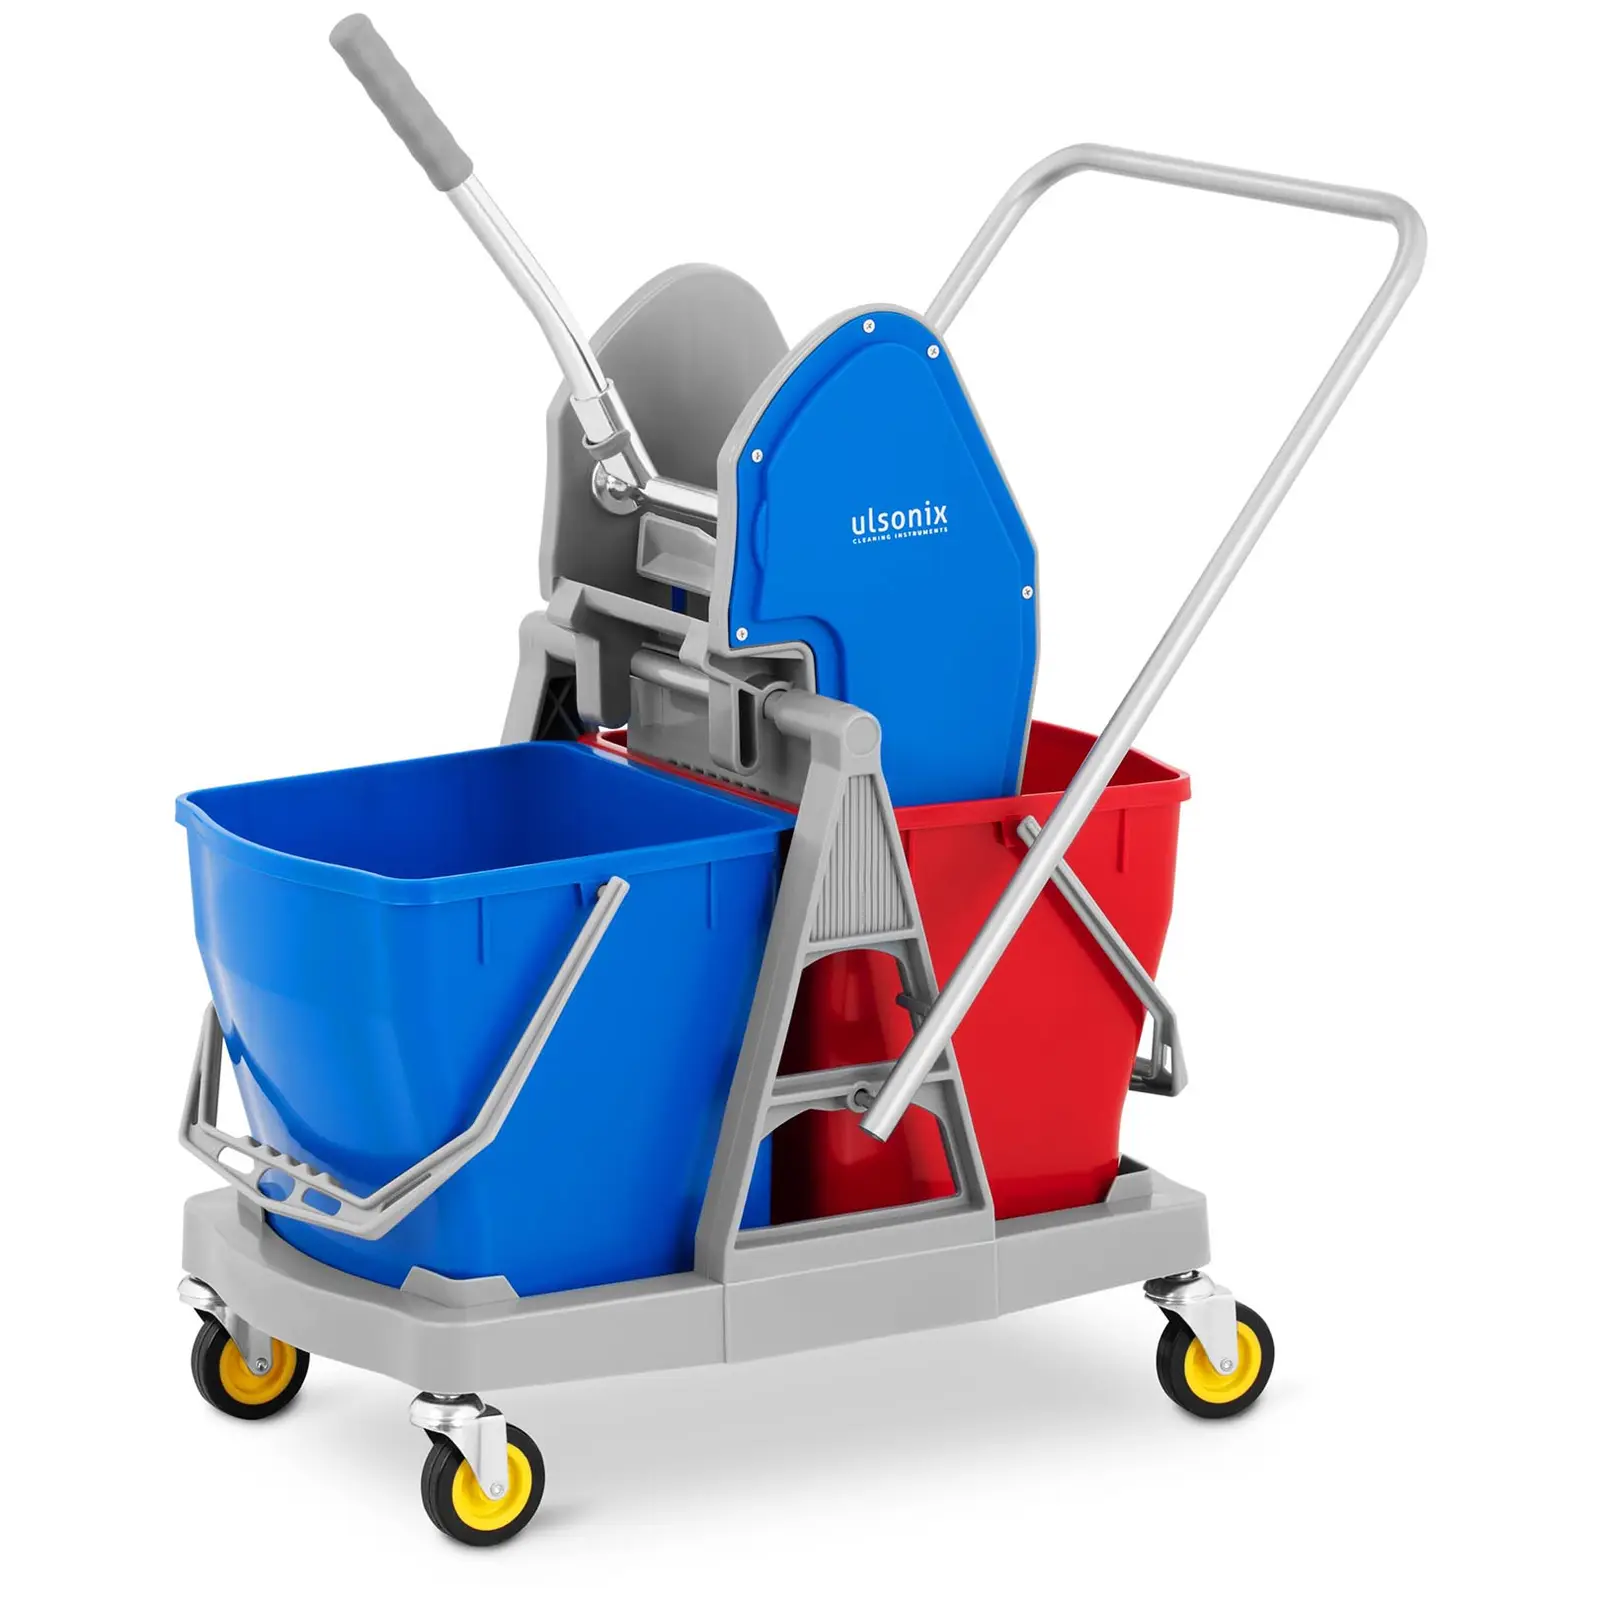 Industrial cleaning equipment and supplies